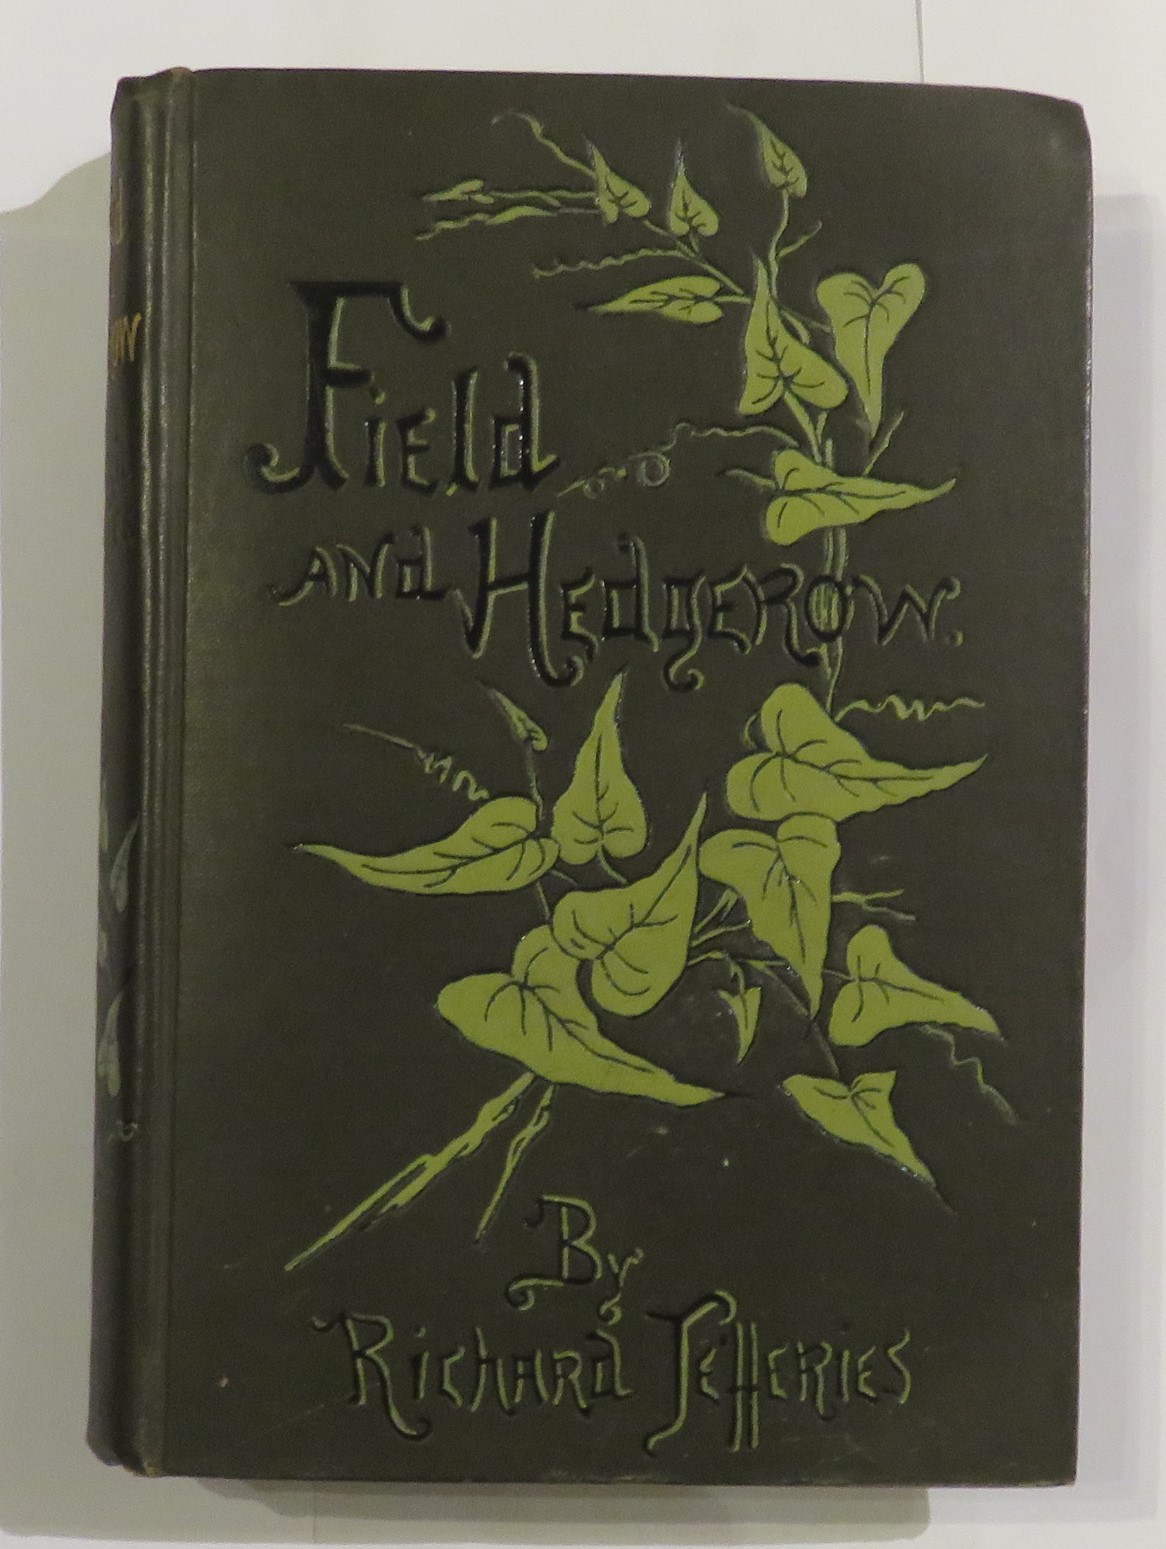 Field and Hedgerow being The Last Essays of Richard Jefferies